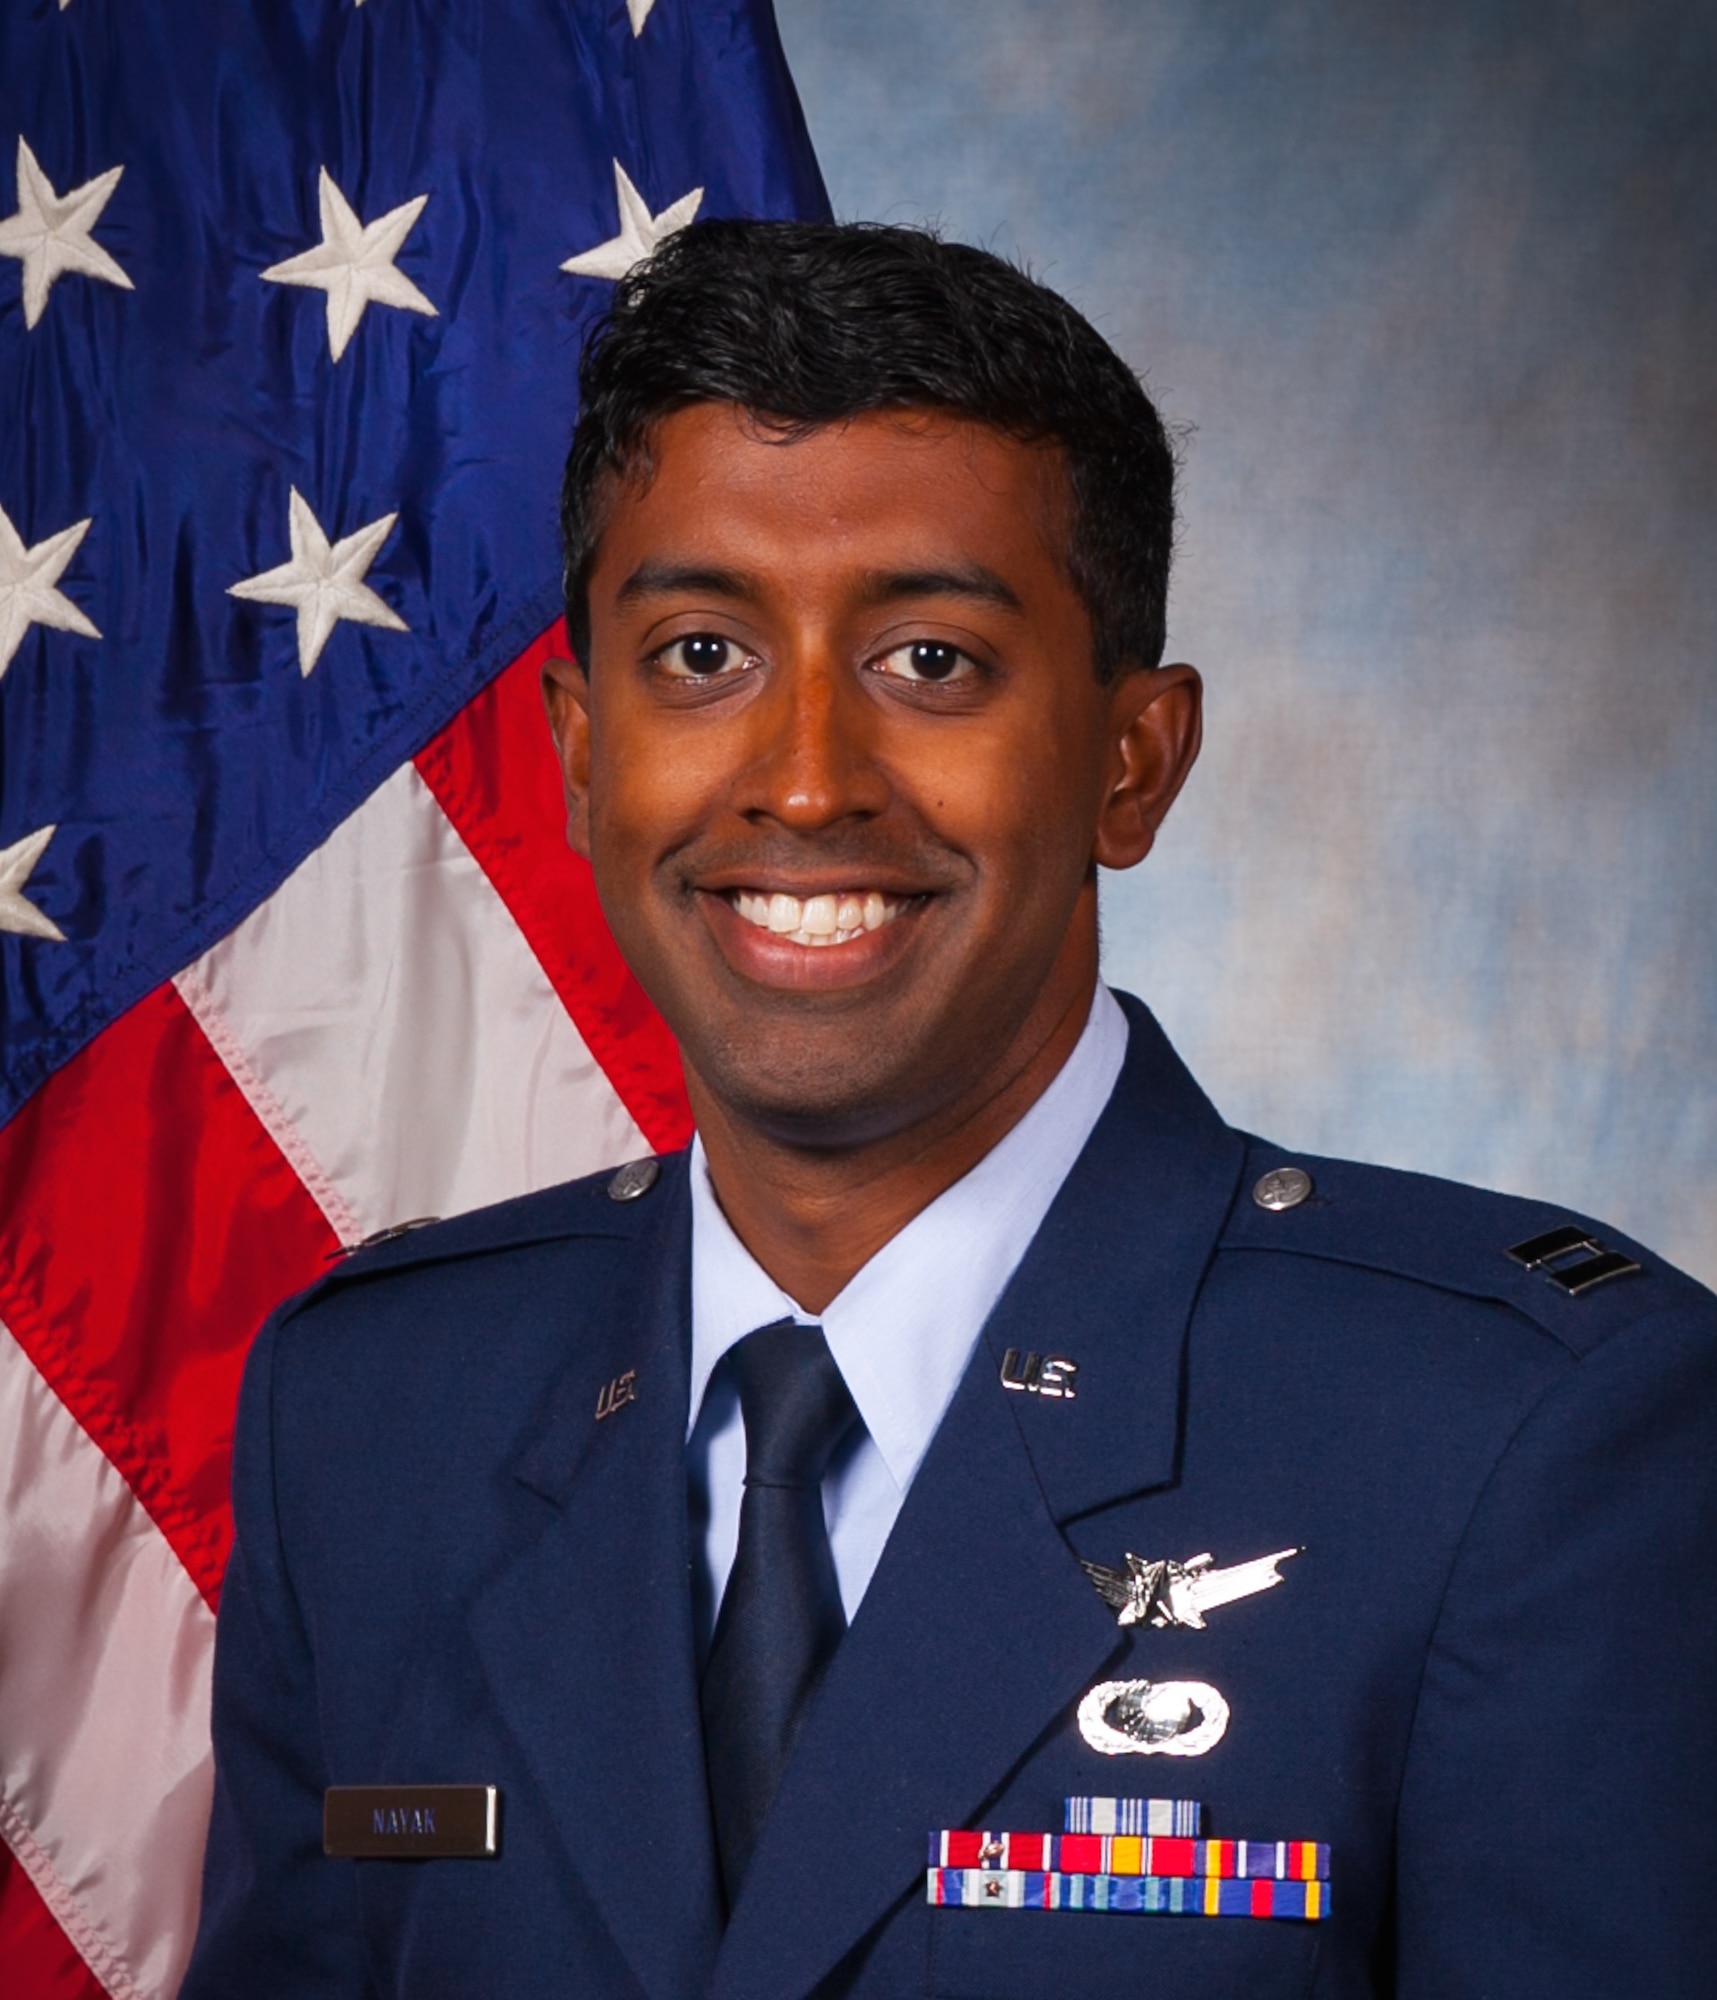 Capt. Michael Nayak is a scientist at the Air Force Research Laboratory Air Force Maui Optical and Supercomputing site. He was a winner of the 2017 Gen. Bernard A. Schriever Memorial Essay Contest.